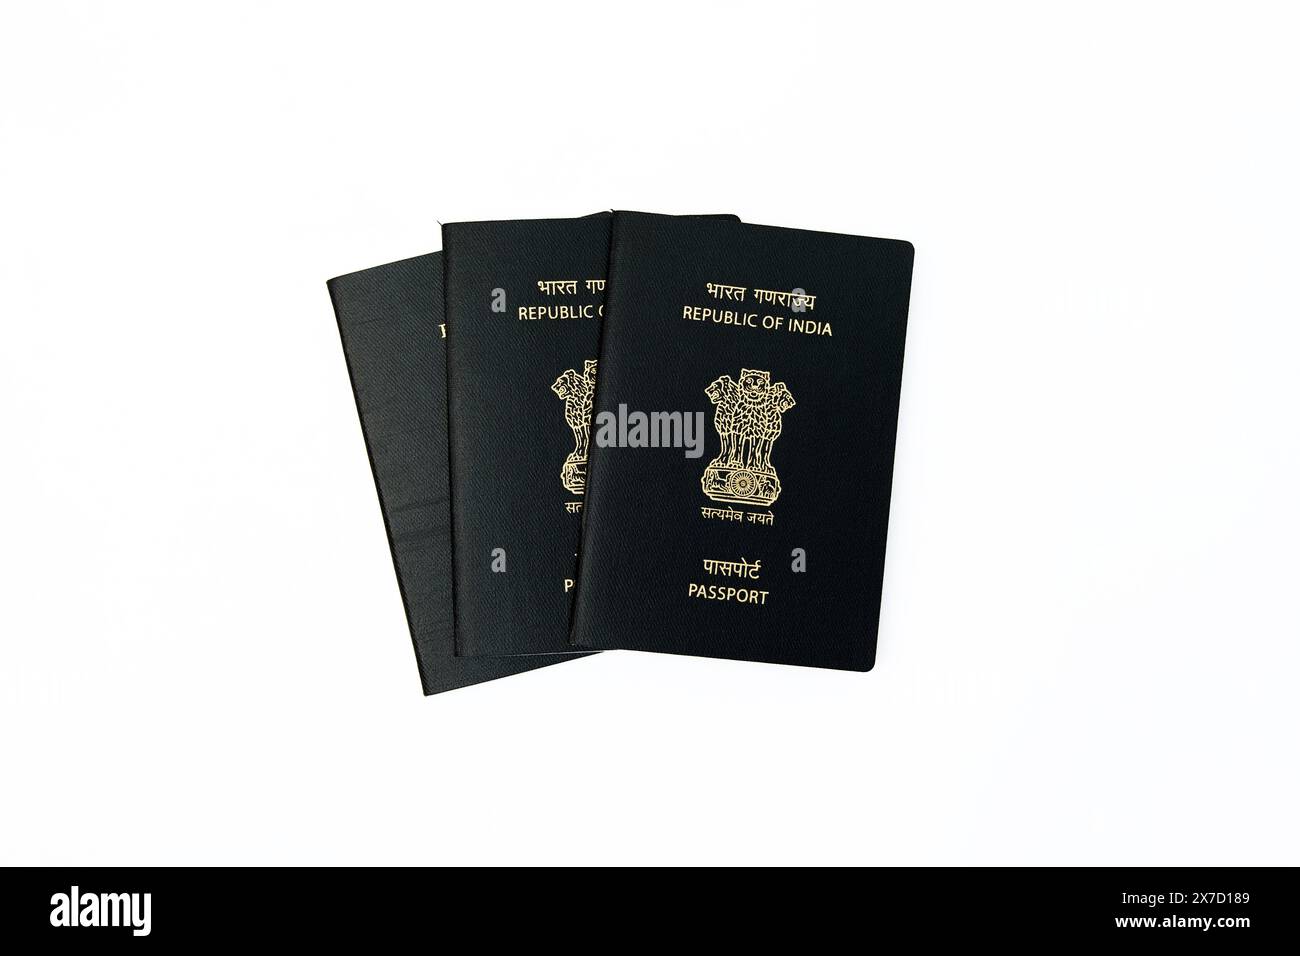 This image is about Two Indian passports on a white background Isolated with clipping path Stock Photo